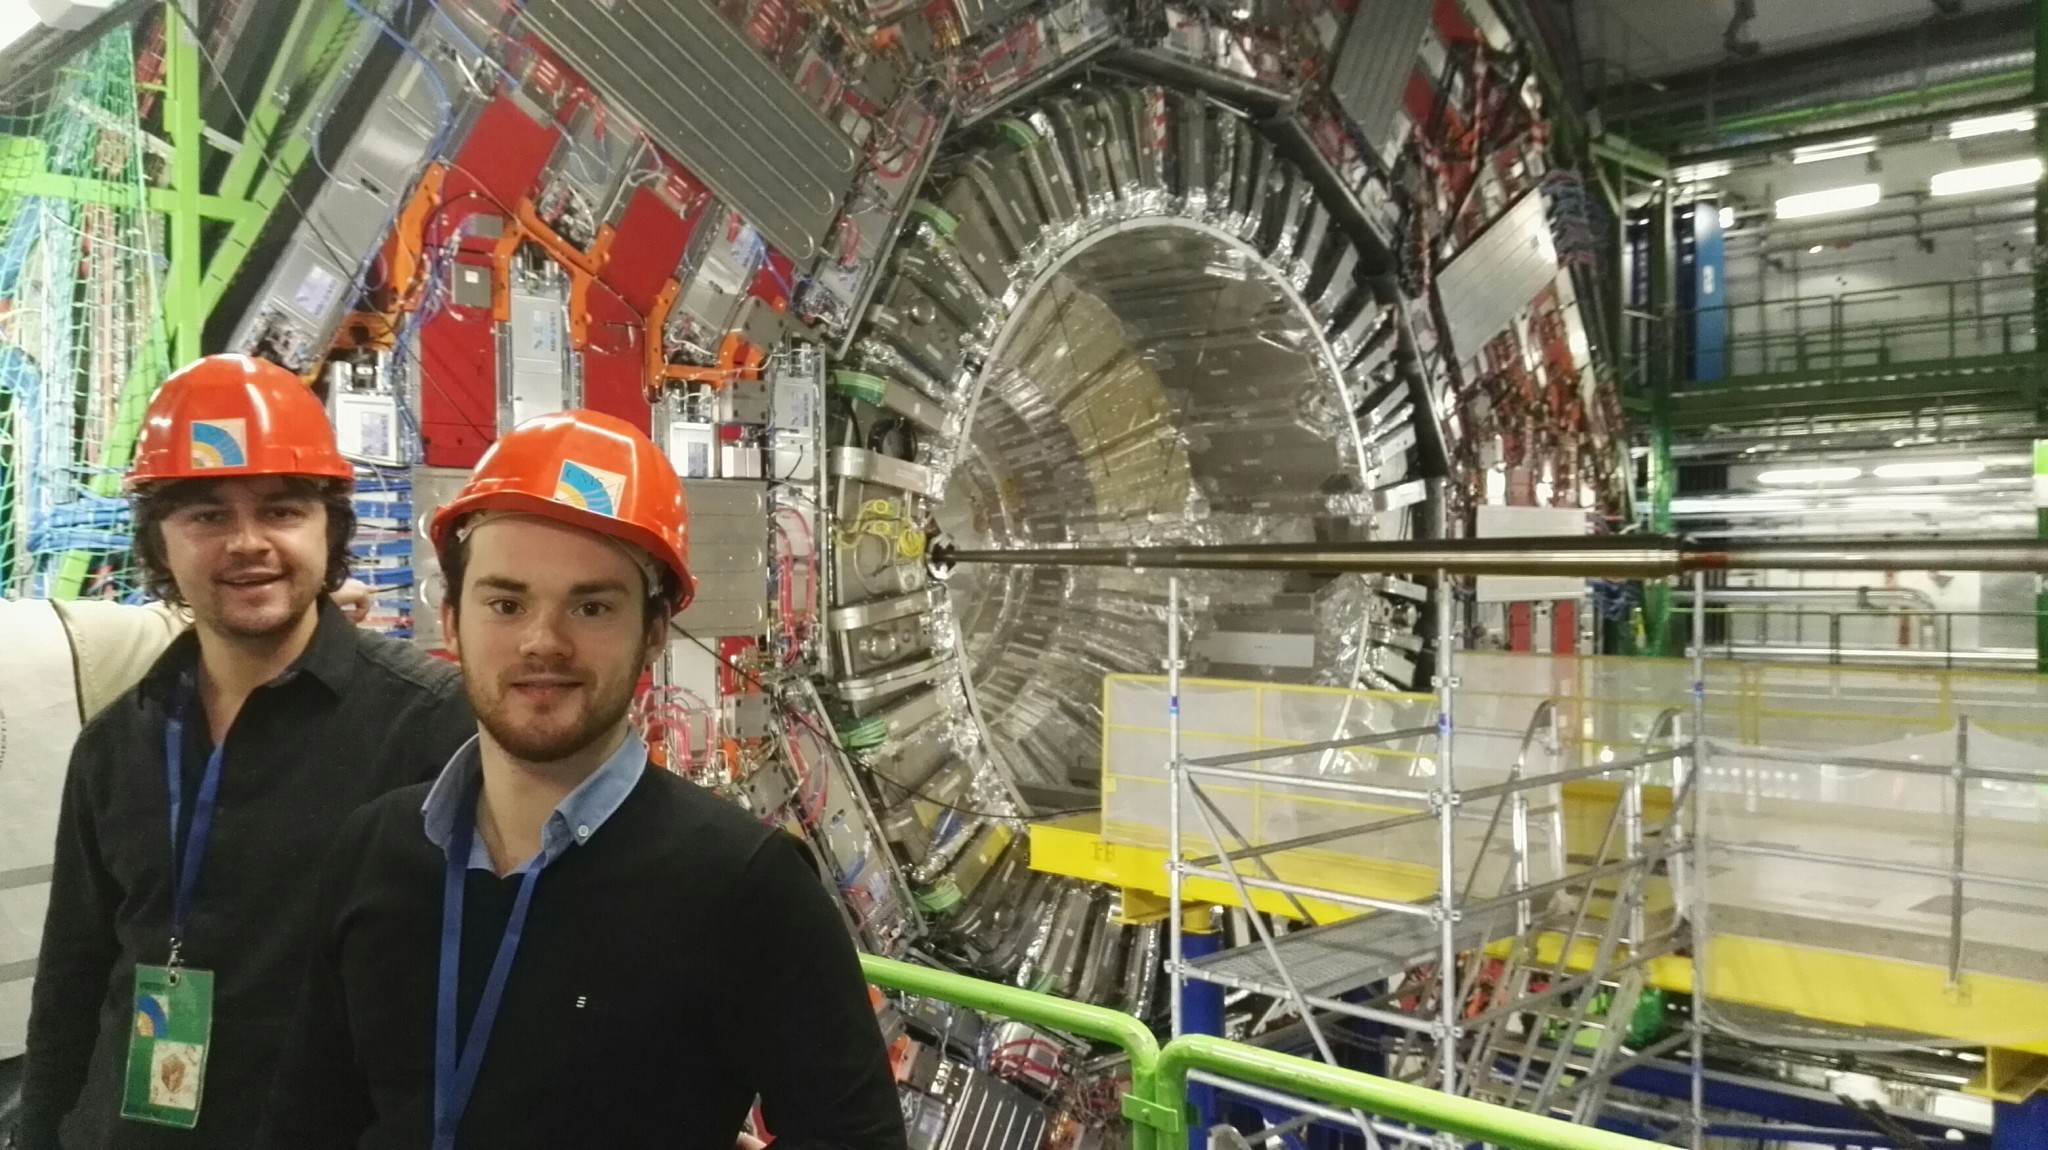 The President of CERN as your private tour guide Vox magazine